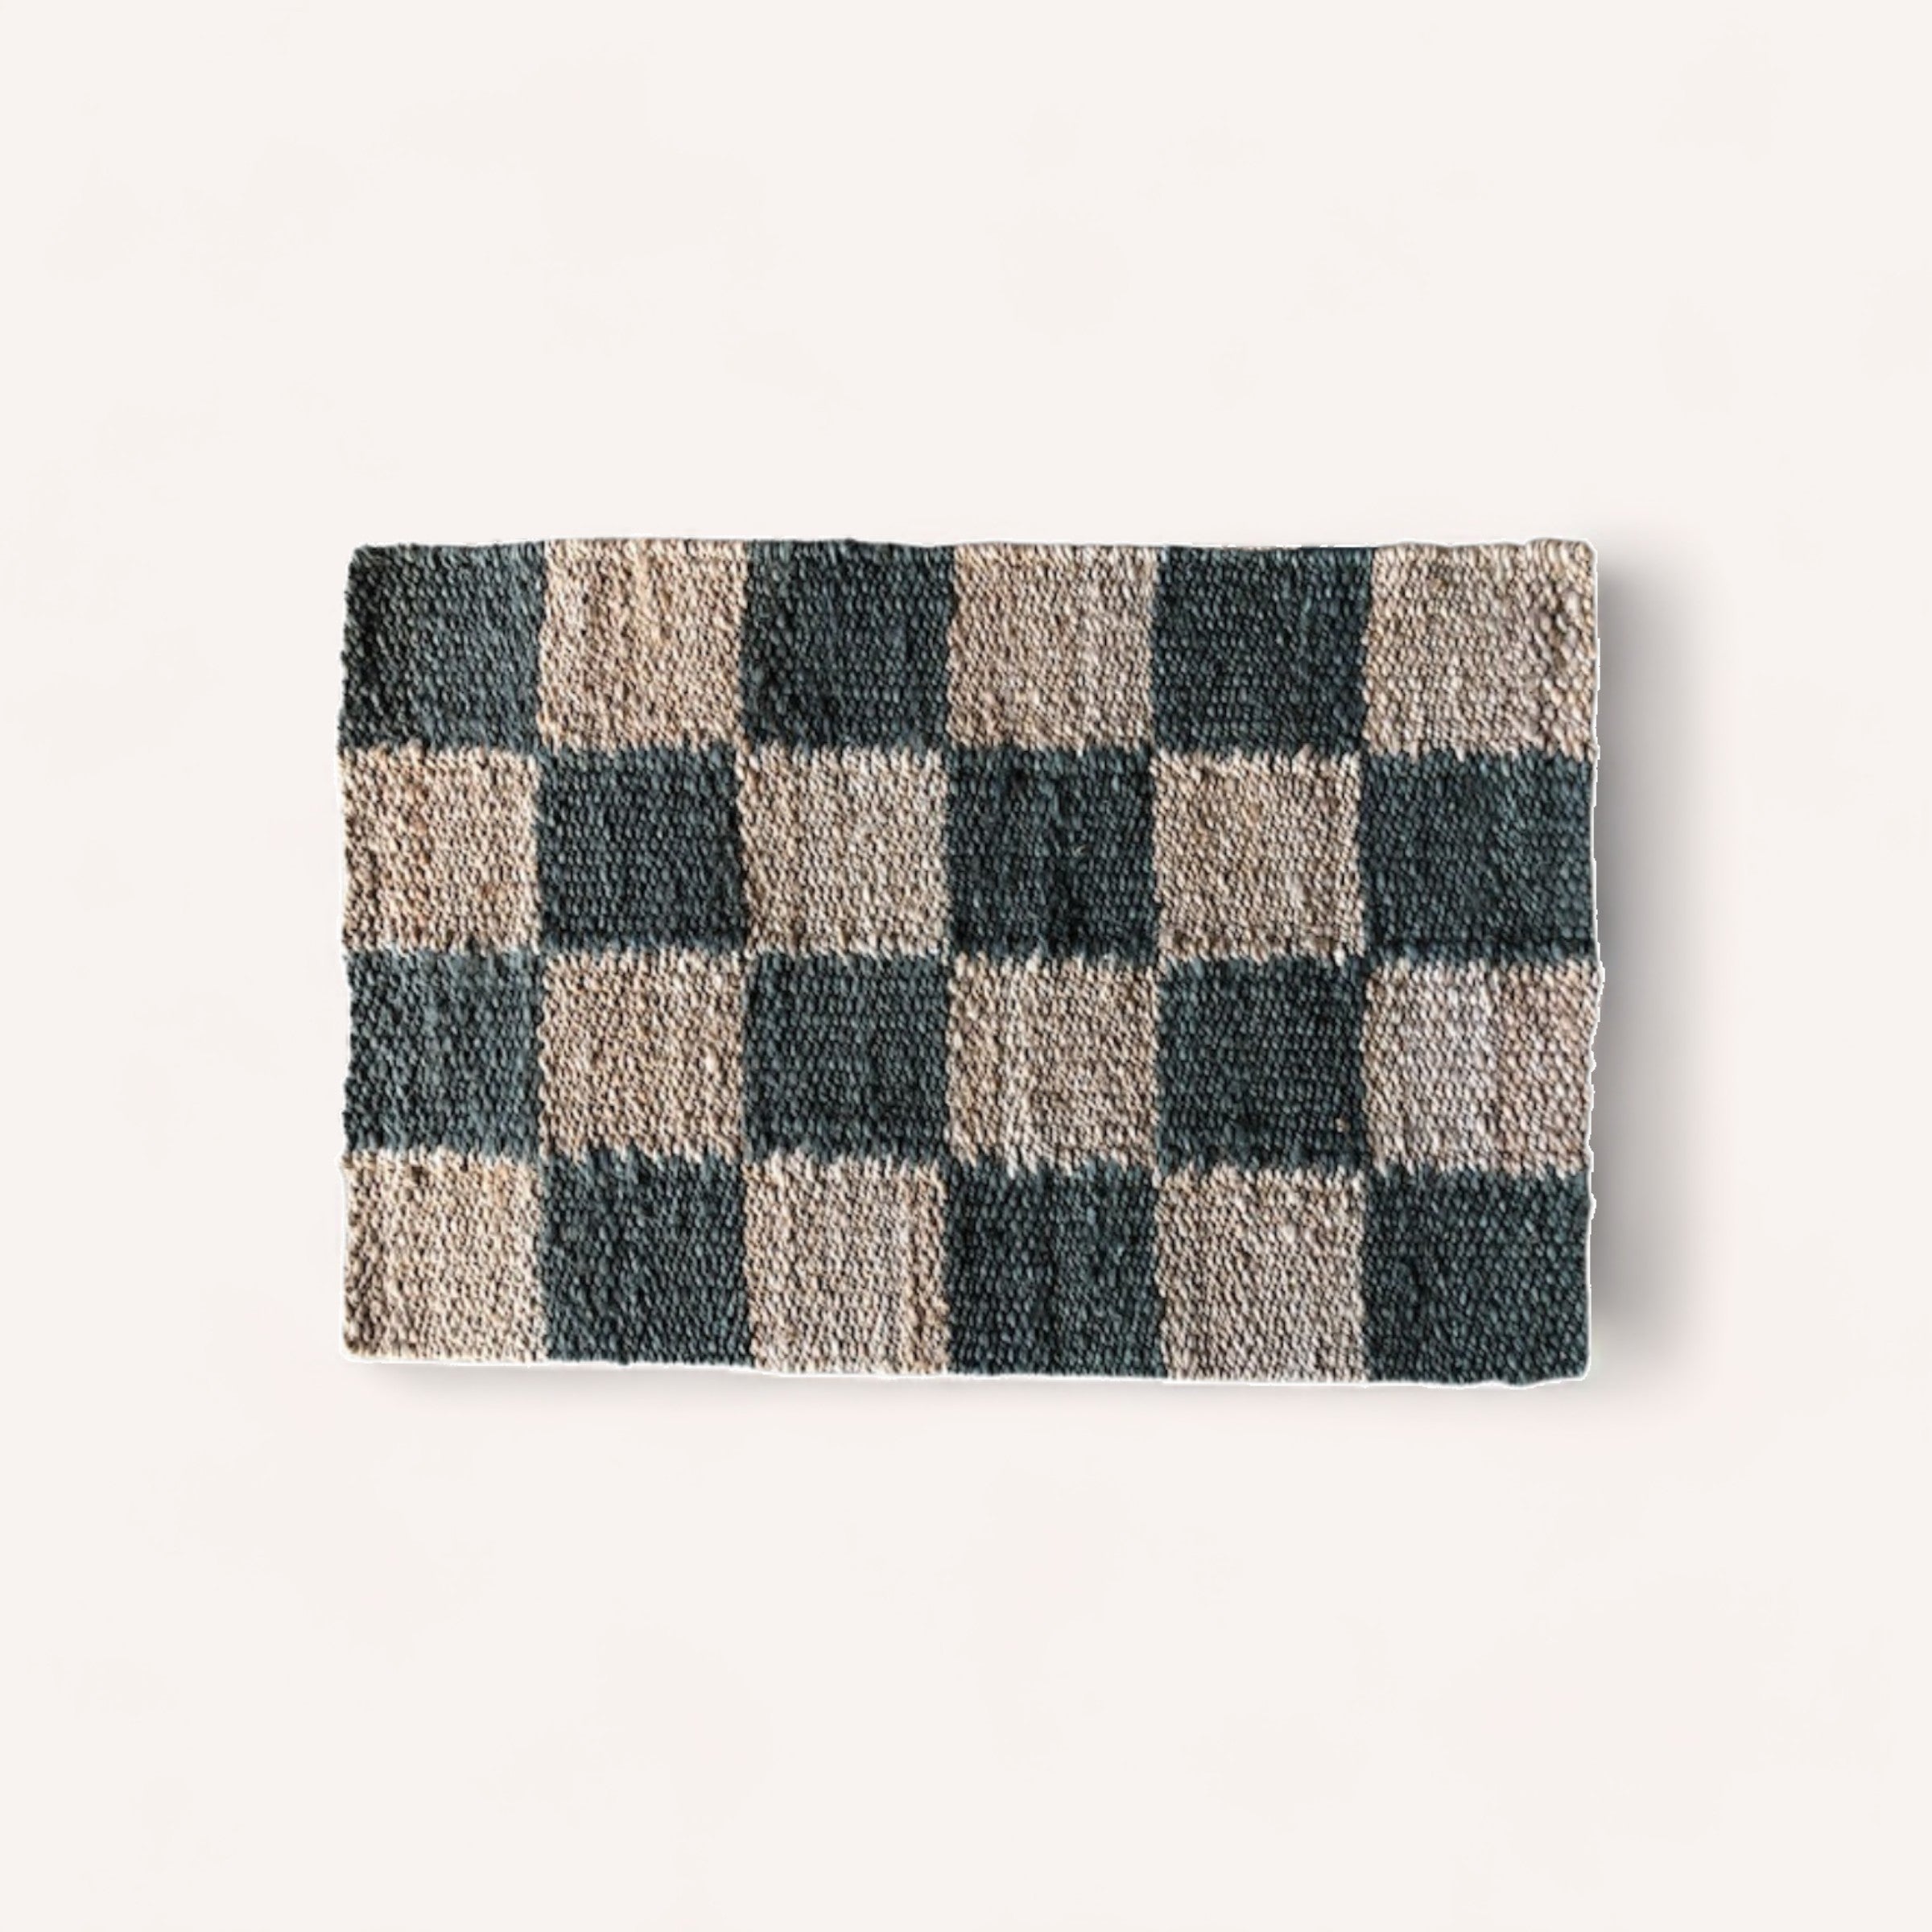 A folded Jute Mat Green Checker blanket by PottedNZ on a white background.